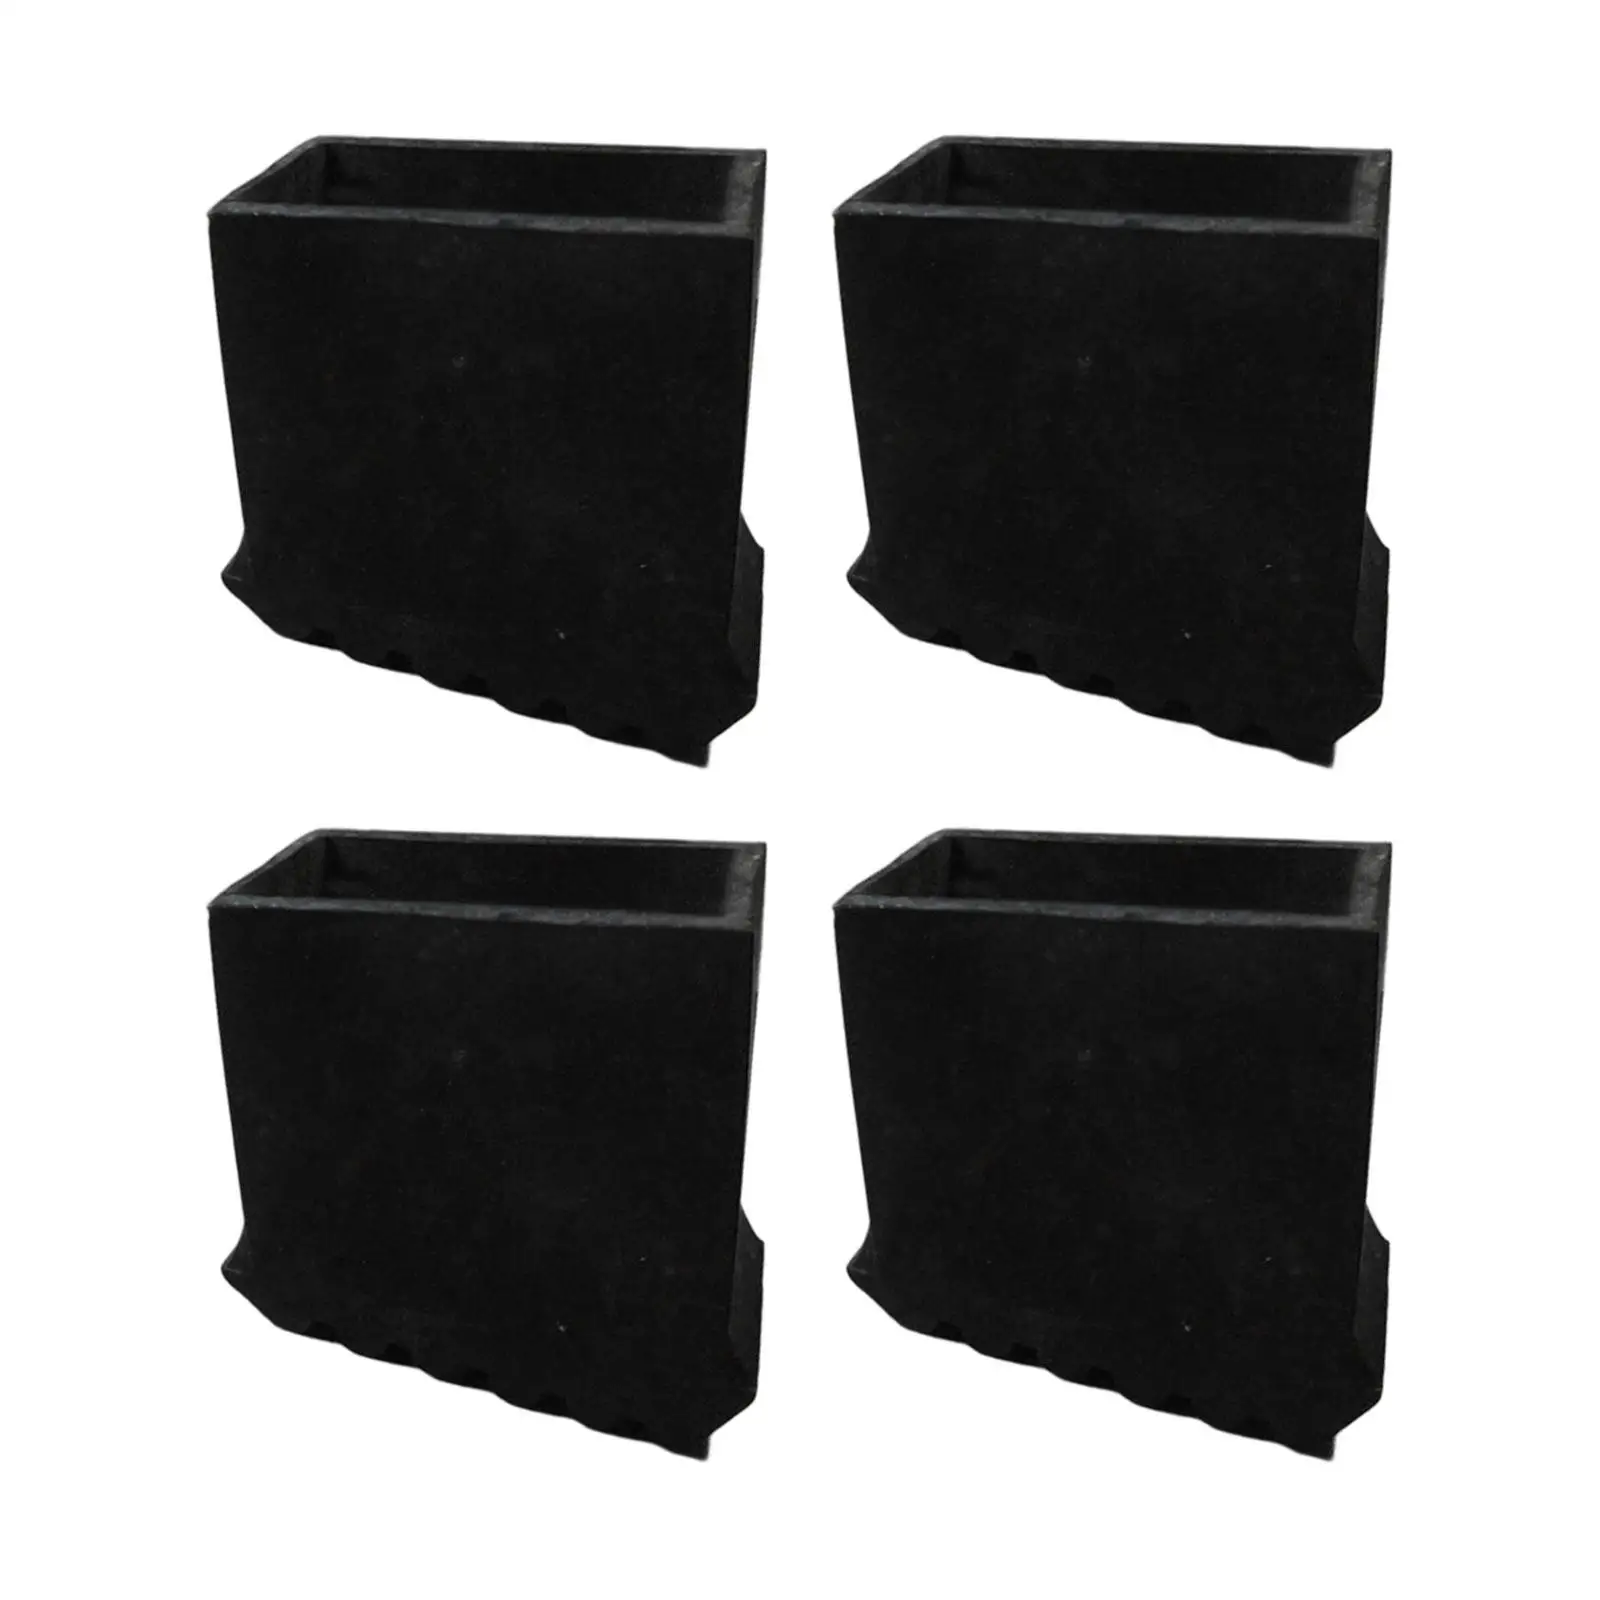 4Pcs Rubber Steep Ladder Foot Pads Convenient Durable Protects Your Floor Easy to Install Wear Resistance Cushion Ladder Covers